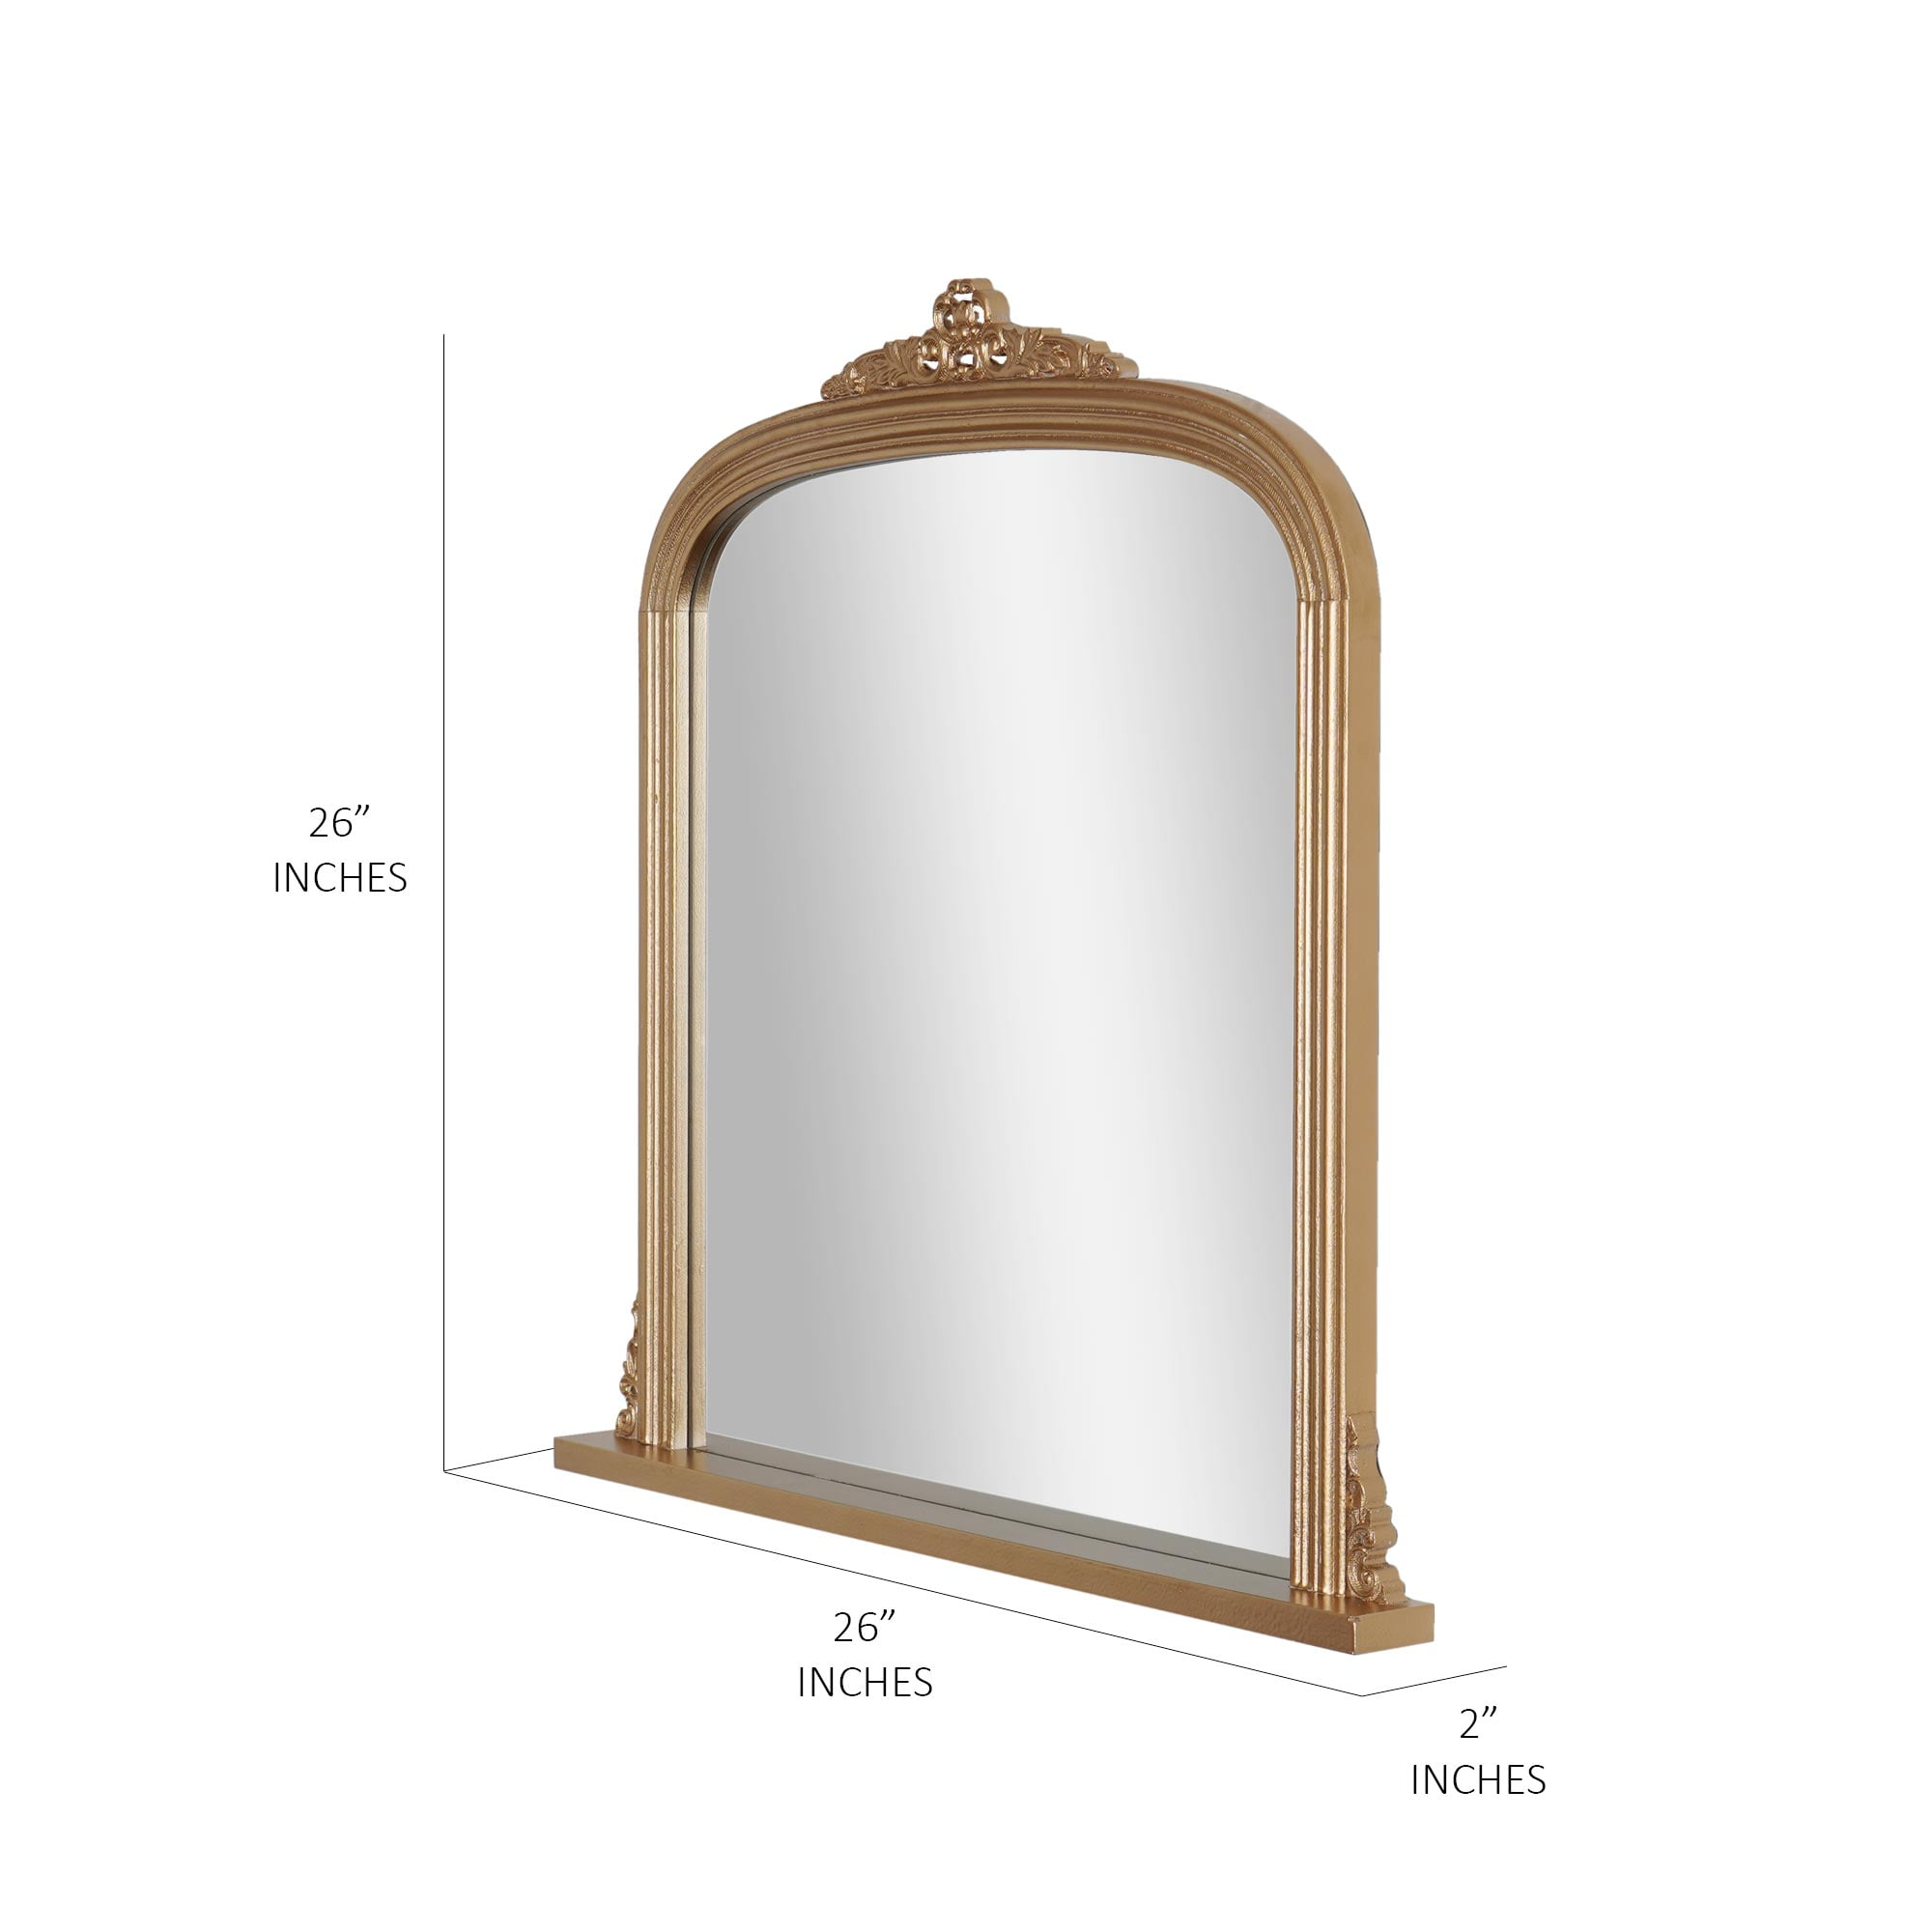 Head West Arch Antique Brass Ornate Decorative Accent Wall Mirror - 26